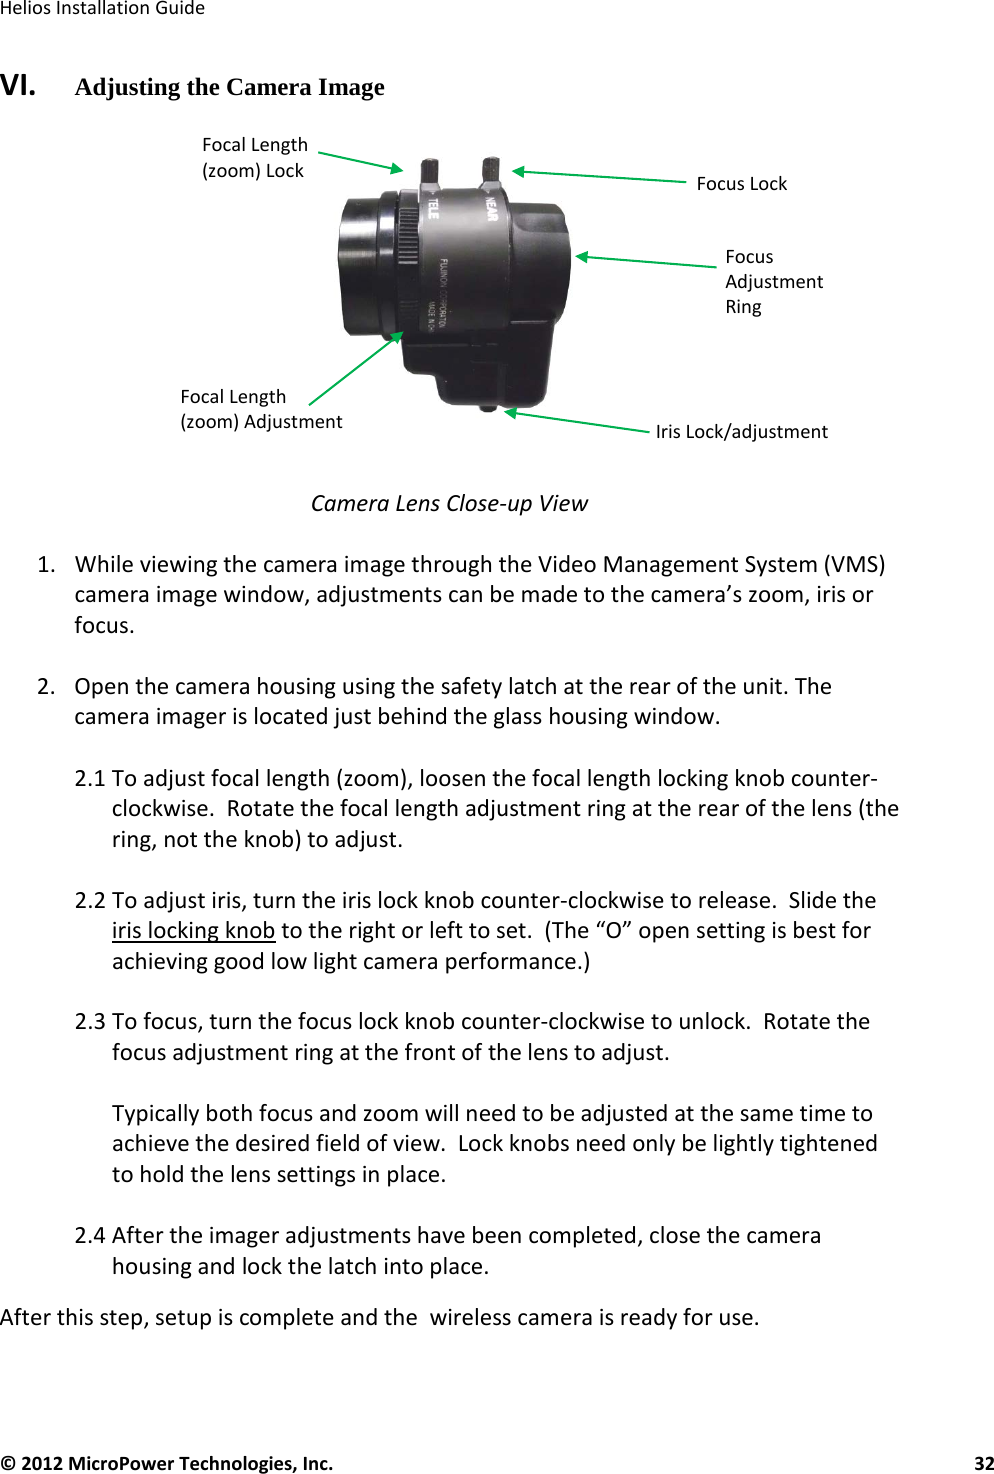   Helios Installation Guide  © 2012 MicroPower Technologies, Inc.      32   VI.   Adjusting the Camera Image     Camera Lens Close-up View  1. While viewing the camera image through the Video Management System (VMS) camera image window, adjustments can be made to the camera’s zoom, iris or focus.  2. Open the camera housing using the safety latch at the rear of the unit. The camera imager is located just behind the glass housing window.  2.1 To adjust focal length (zoom), loosen the focal length locking knob counter-clockwise.  Rotate the focal length adjustment ring at the rear of the lens (the ring, not the knob) to adjust.    2.2 To adjust iris, turn the iris lock knob counter-clockwise to release.  Slide the iris locking knob to the right or left to set.  (The “O” open setting is best for achieving good low light camera performance.)  2.3 To focus, turn the focus lock knob counter-clockwise to unlock.  Rotate the focus adjustment ring at the front of the lens to adjust.  Typically both focus and zoom will need to be adjusted at the same time to achieve the desired field of view.  Lock knobs need only be lightly tightened to hold the lens settings in place.  2.4 After the imager adjustments have been completed, close the camera housing and lock the latch into place. After this step, setup is complete and the  wireless camera is ready for use.    Iris Lock/adjustment Focus Lock Focal Length (zoom) Lock Focal Length (zoom) Adjustment Focus Adjustment Ring  